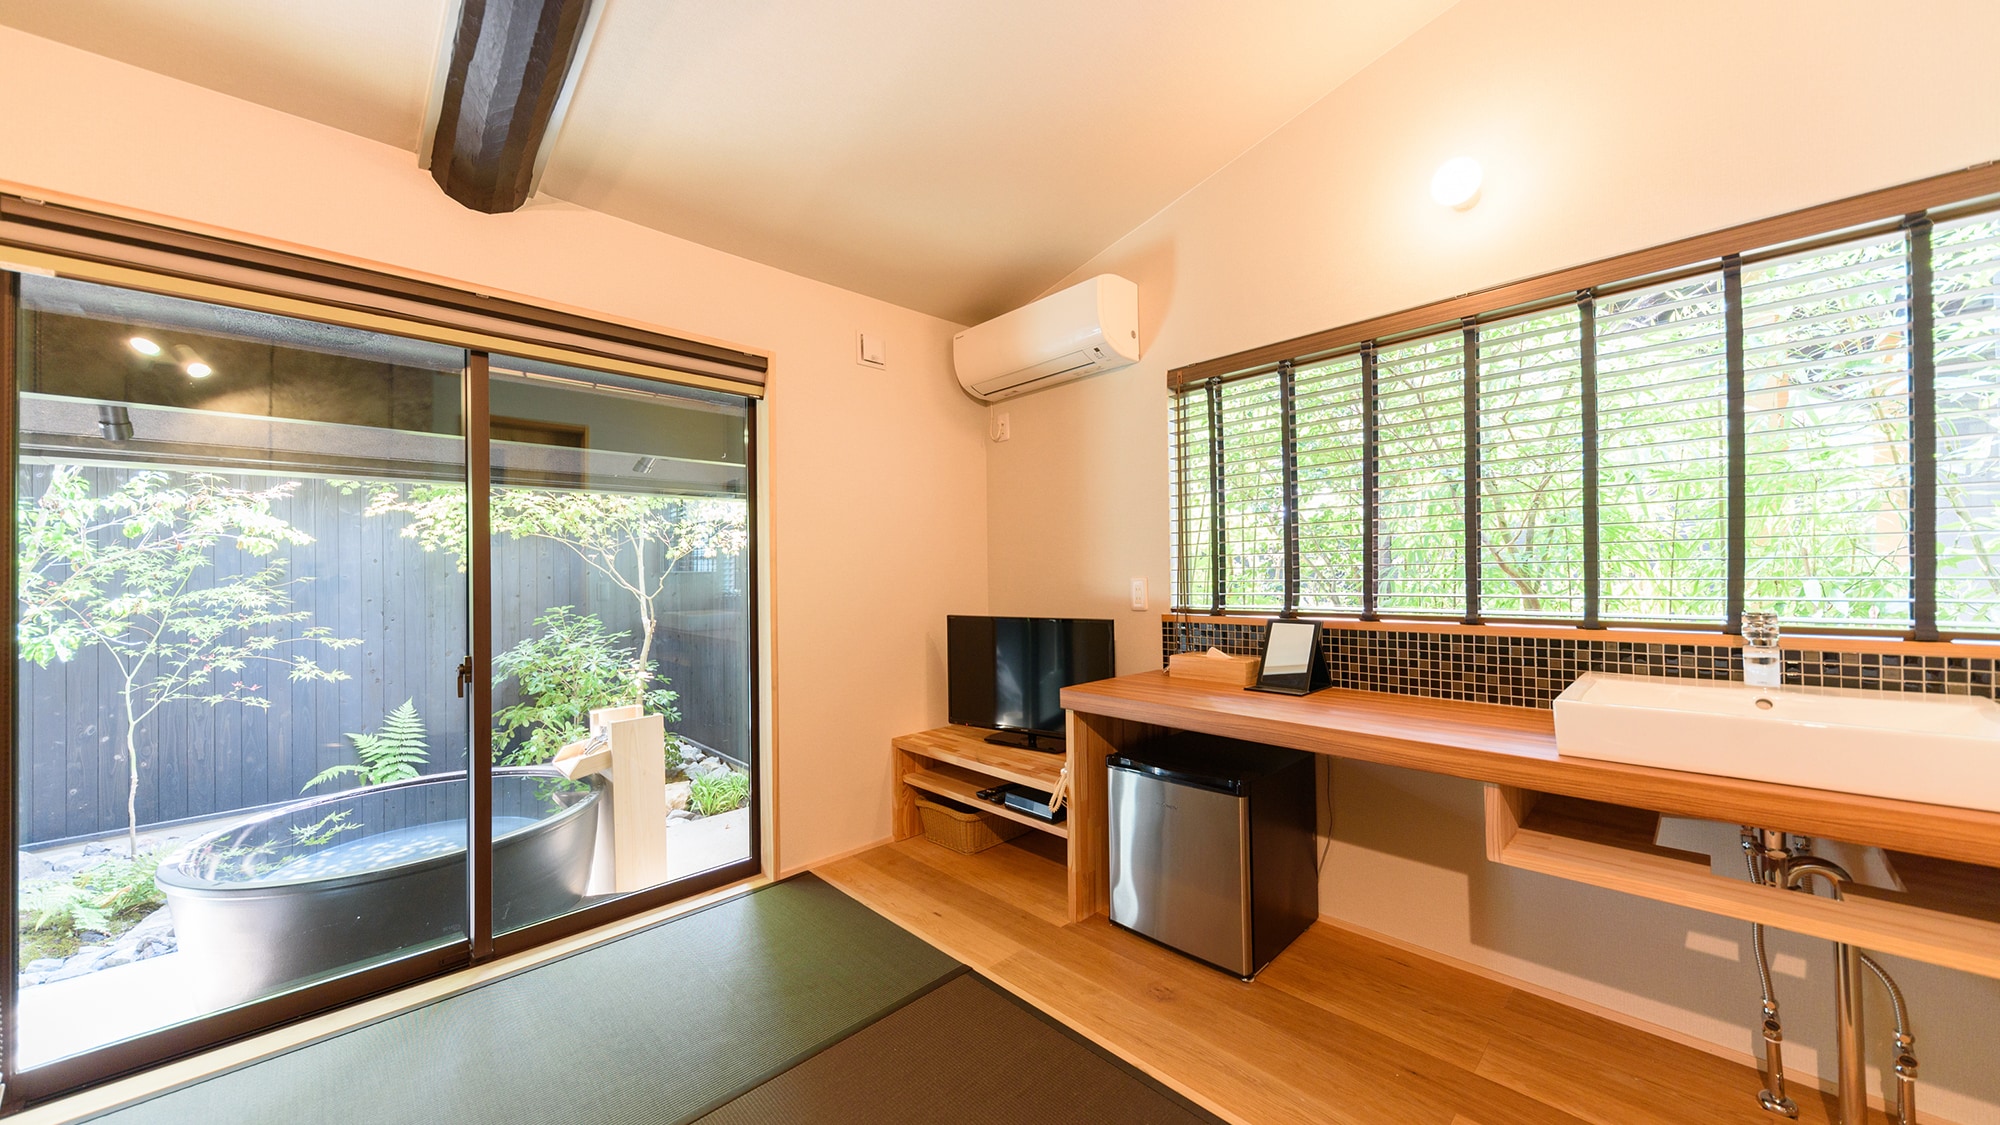 Main building 1st floor: Japanese-style room with semi-open-air bath 6 tatami mats [ink]